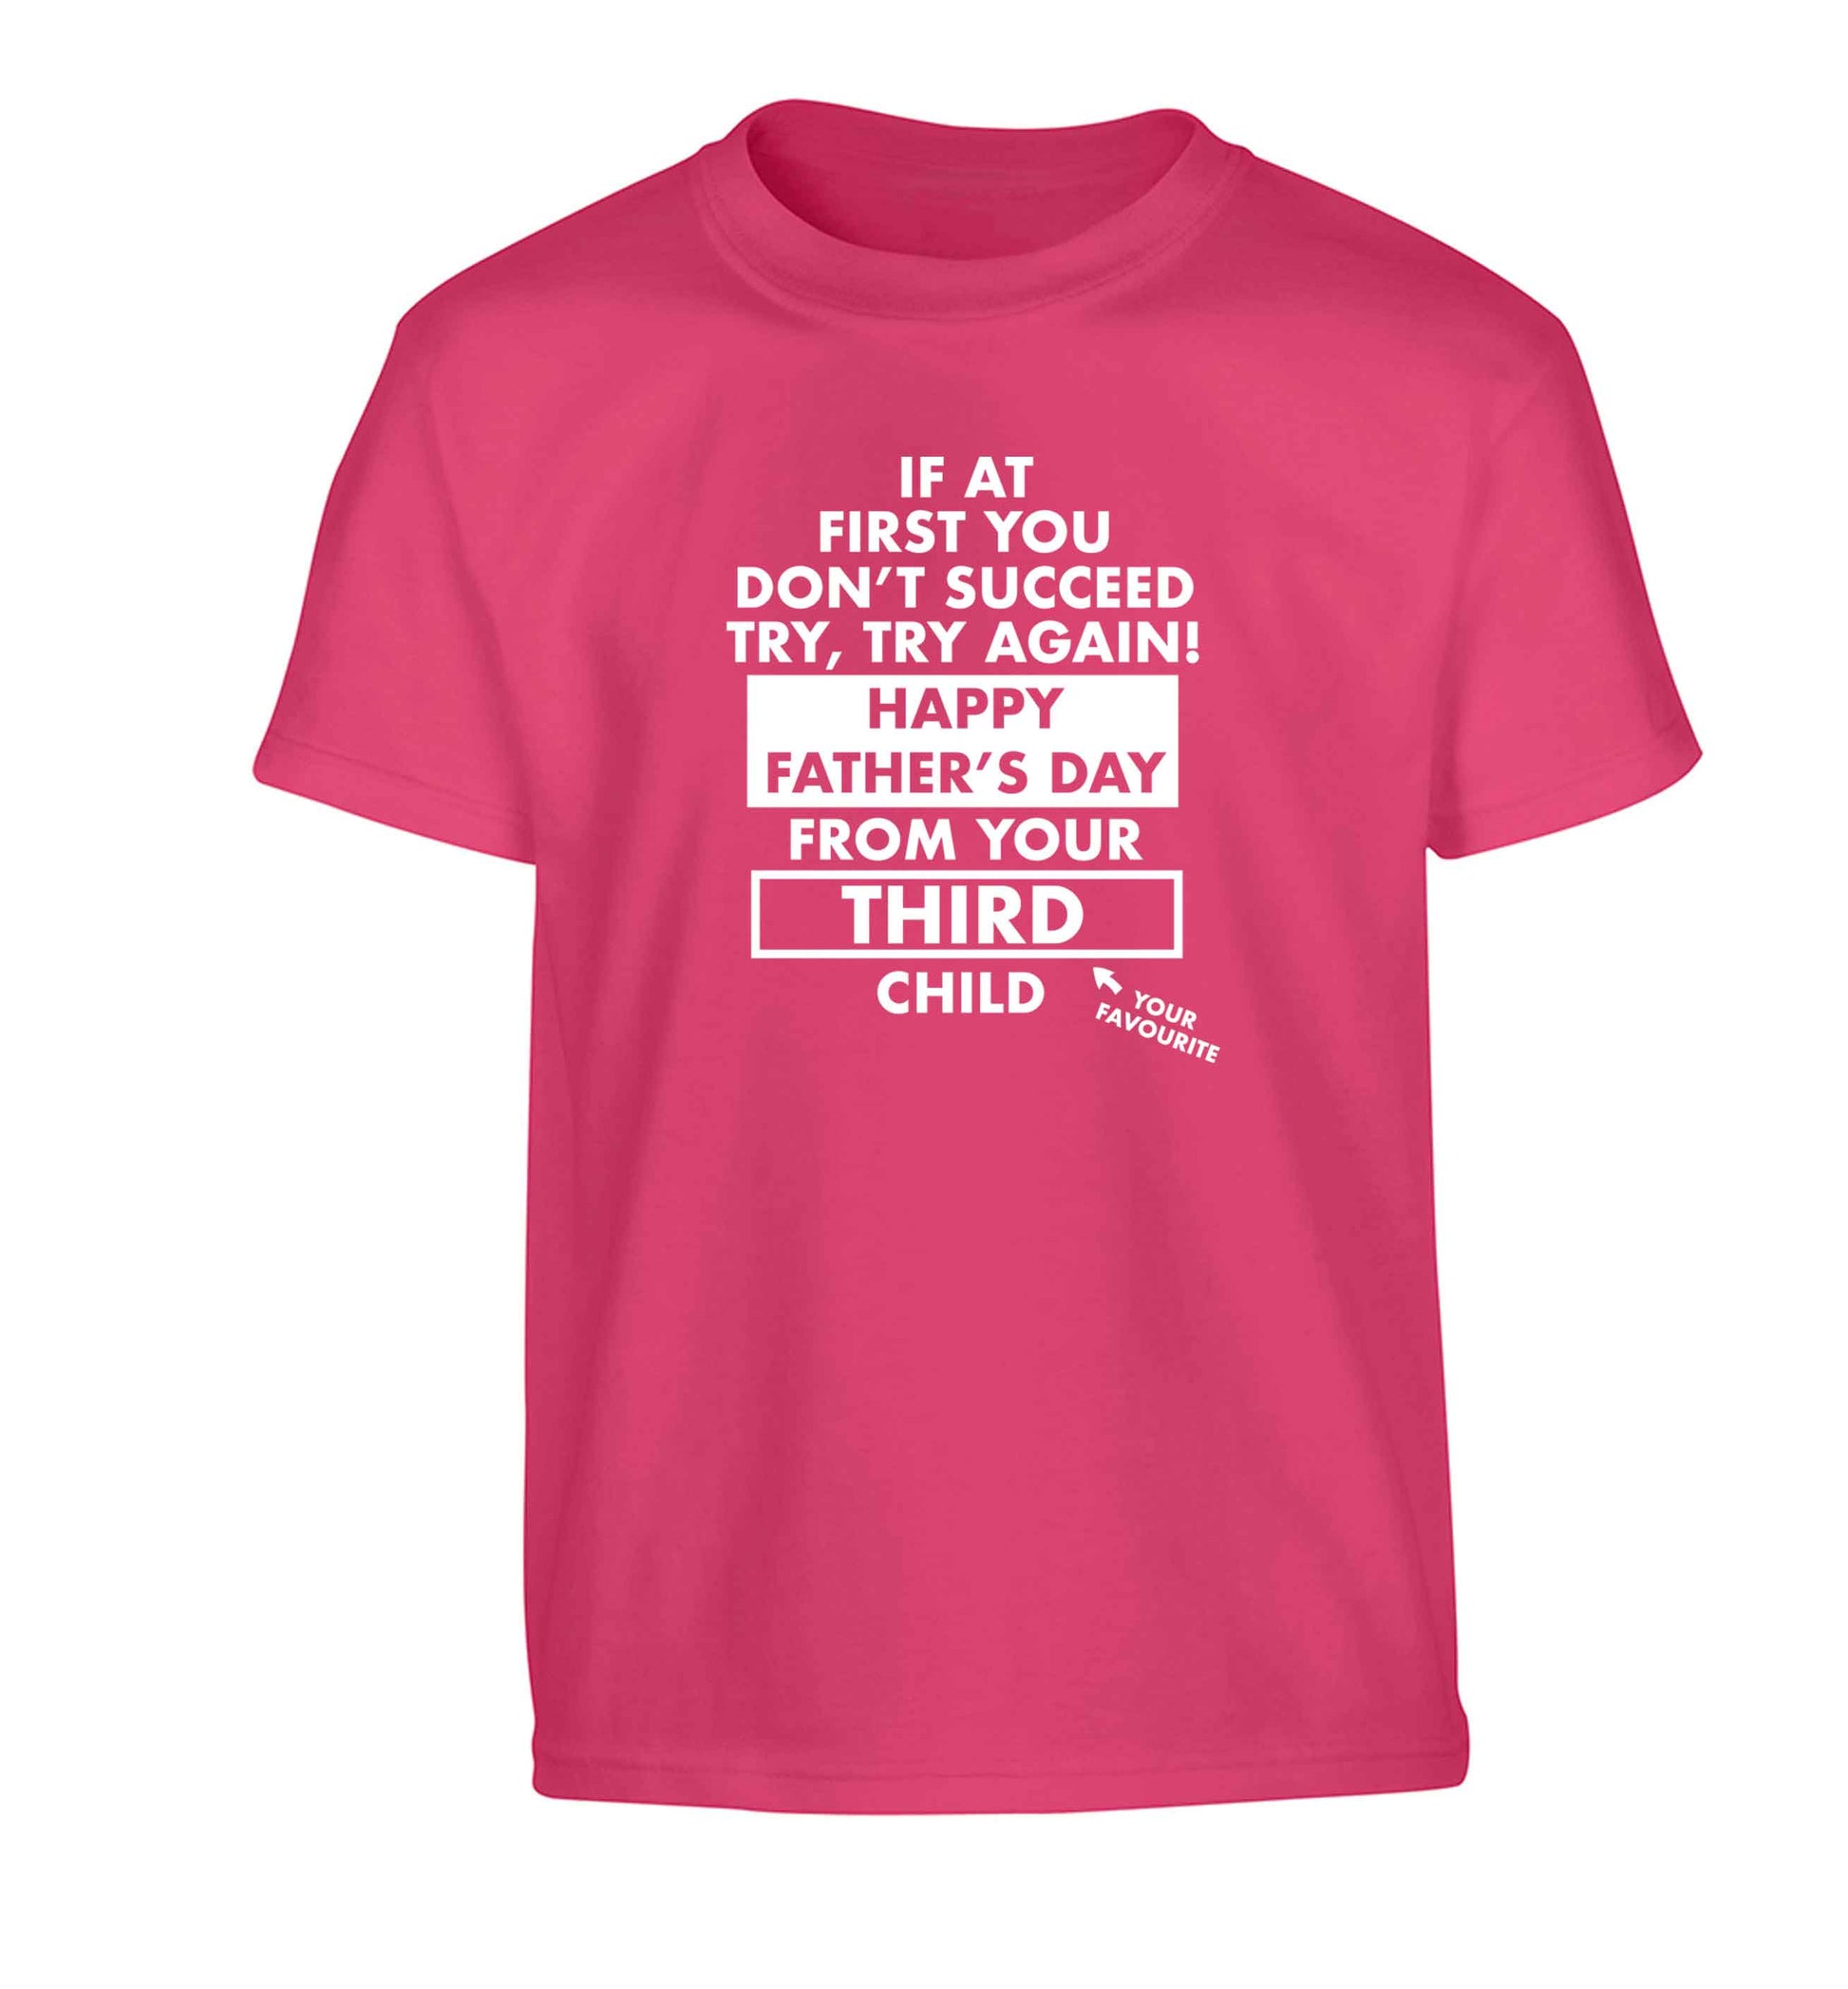 If at first you don't succeed try, try again Happy Father's day from your third child! Children's pink Tshirt 12-13 Years